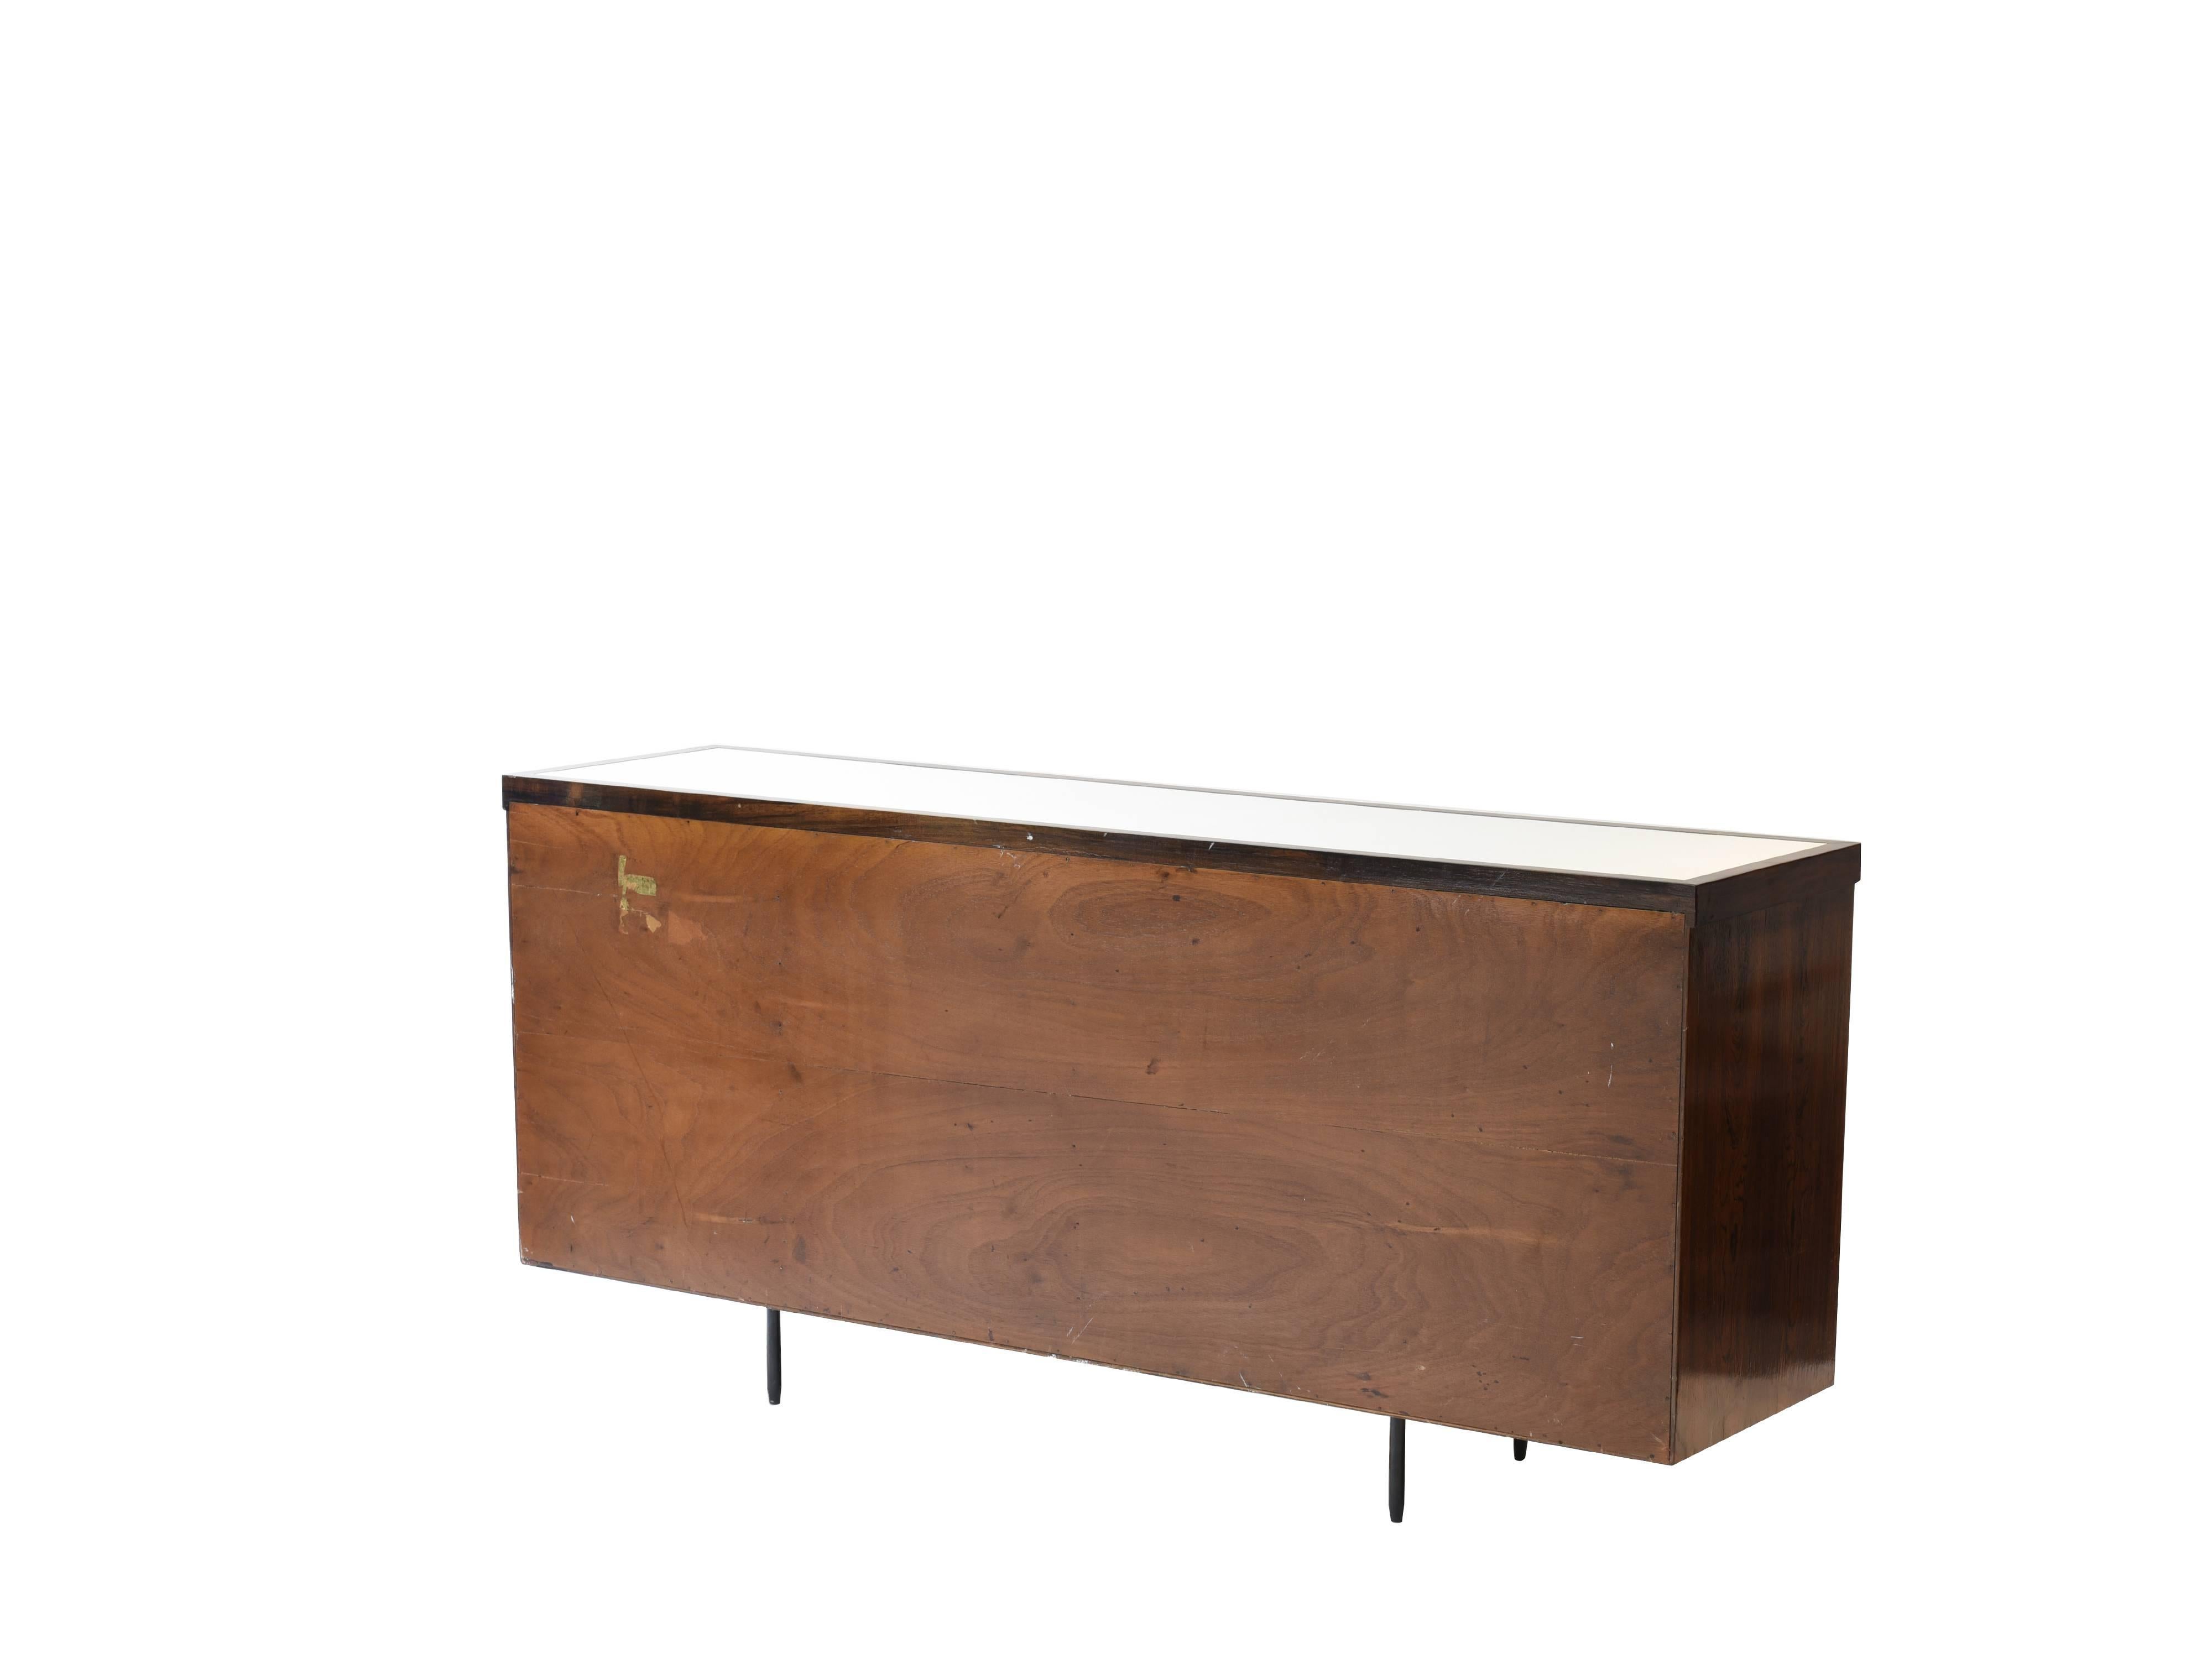 Midcentury brazilian Rosewood Laminate Buffet, 1960s

This spacious buffet is laminated in rosewood on its two sides and front. Contains six drawers, one with lock and one compartment with doors that can also be locked. In addition, its larger,